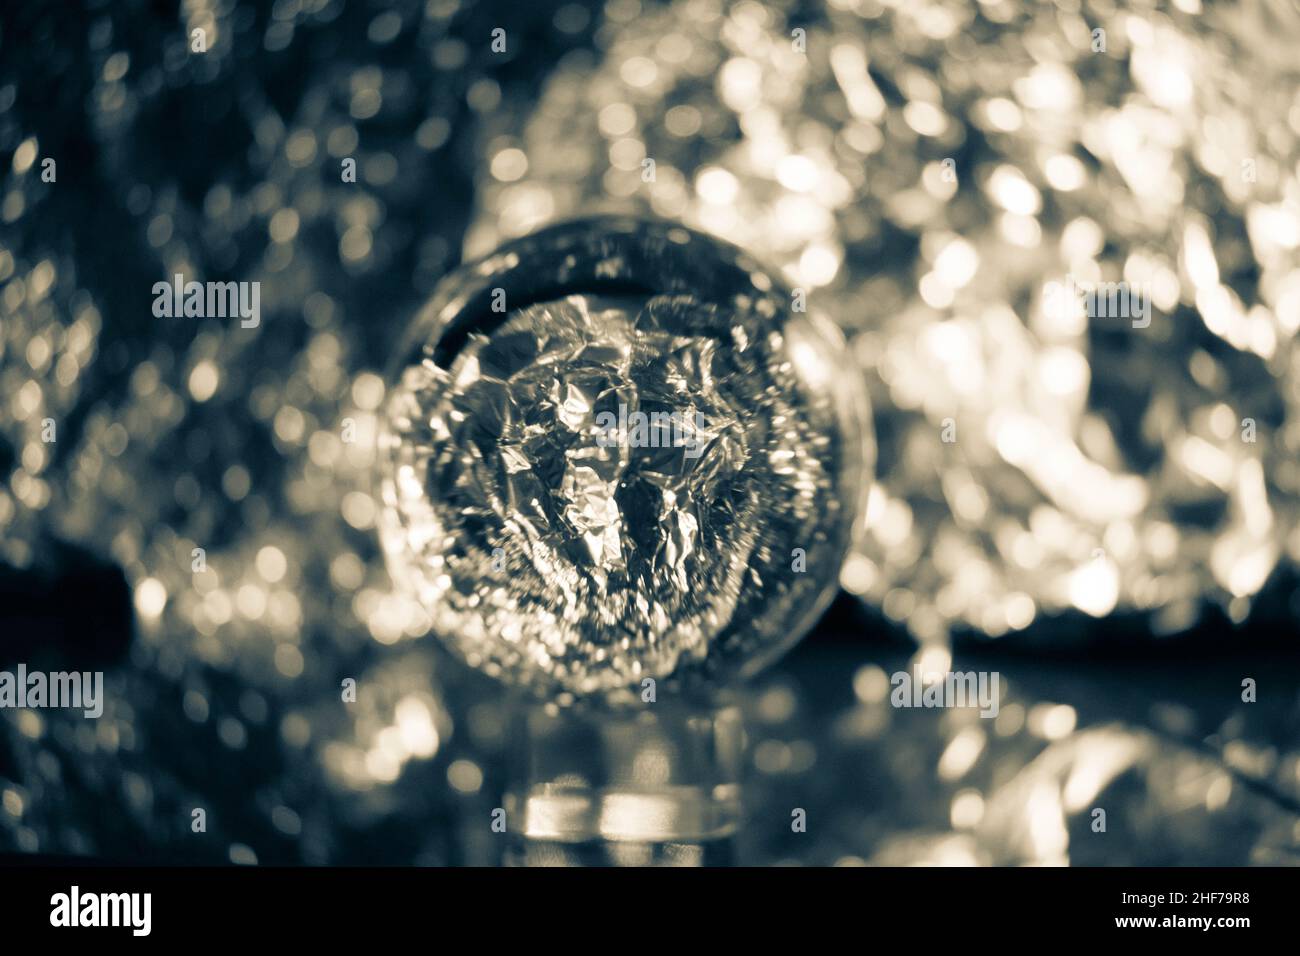 Snow globe photography crystal ball transparent lens on a blurred background, very artistic, futuristic, colourful, vibrant. Cool background and backd Stock Photo